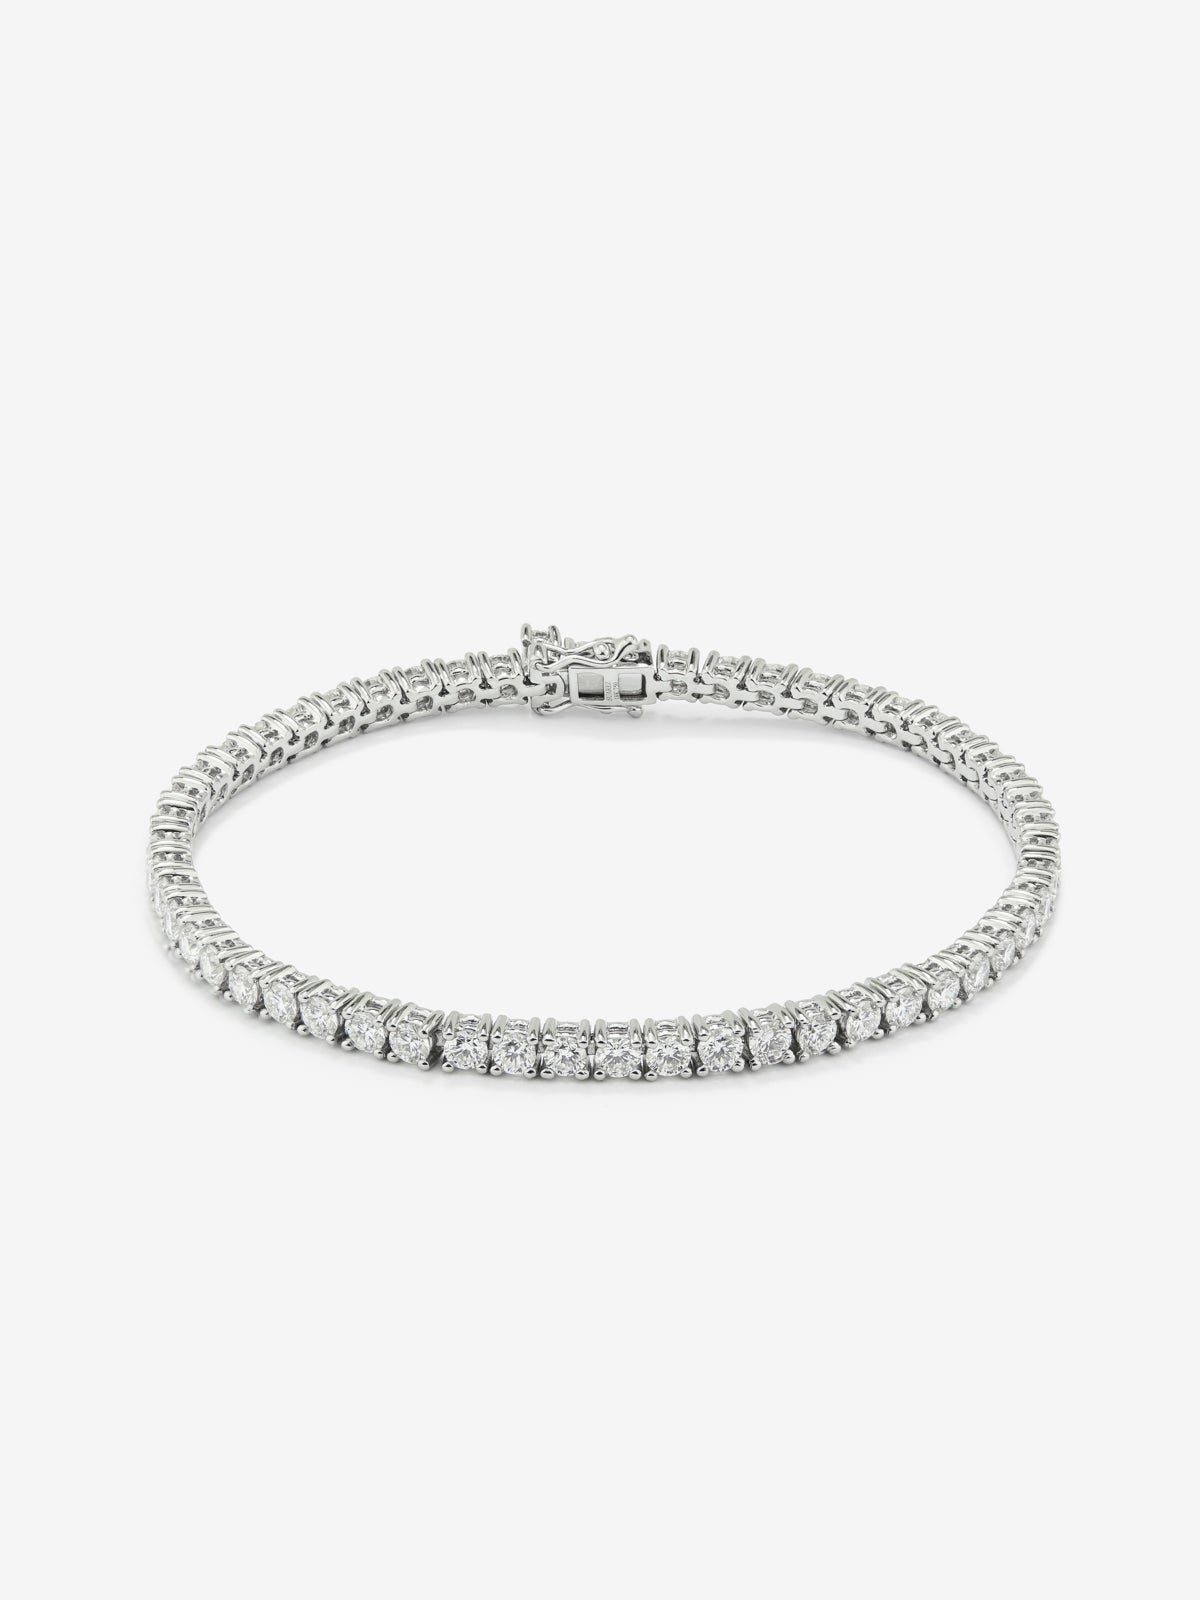 18K white gold rivière bracelet with 62 brilliant-cut diamonds with a total of 3.63 cts